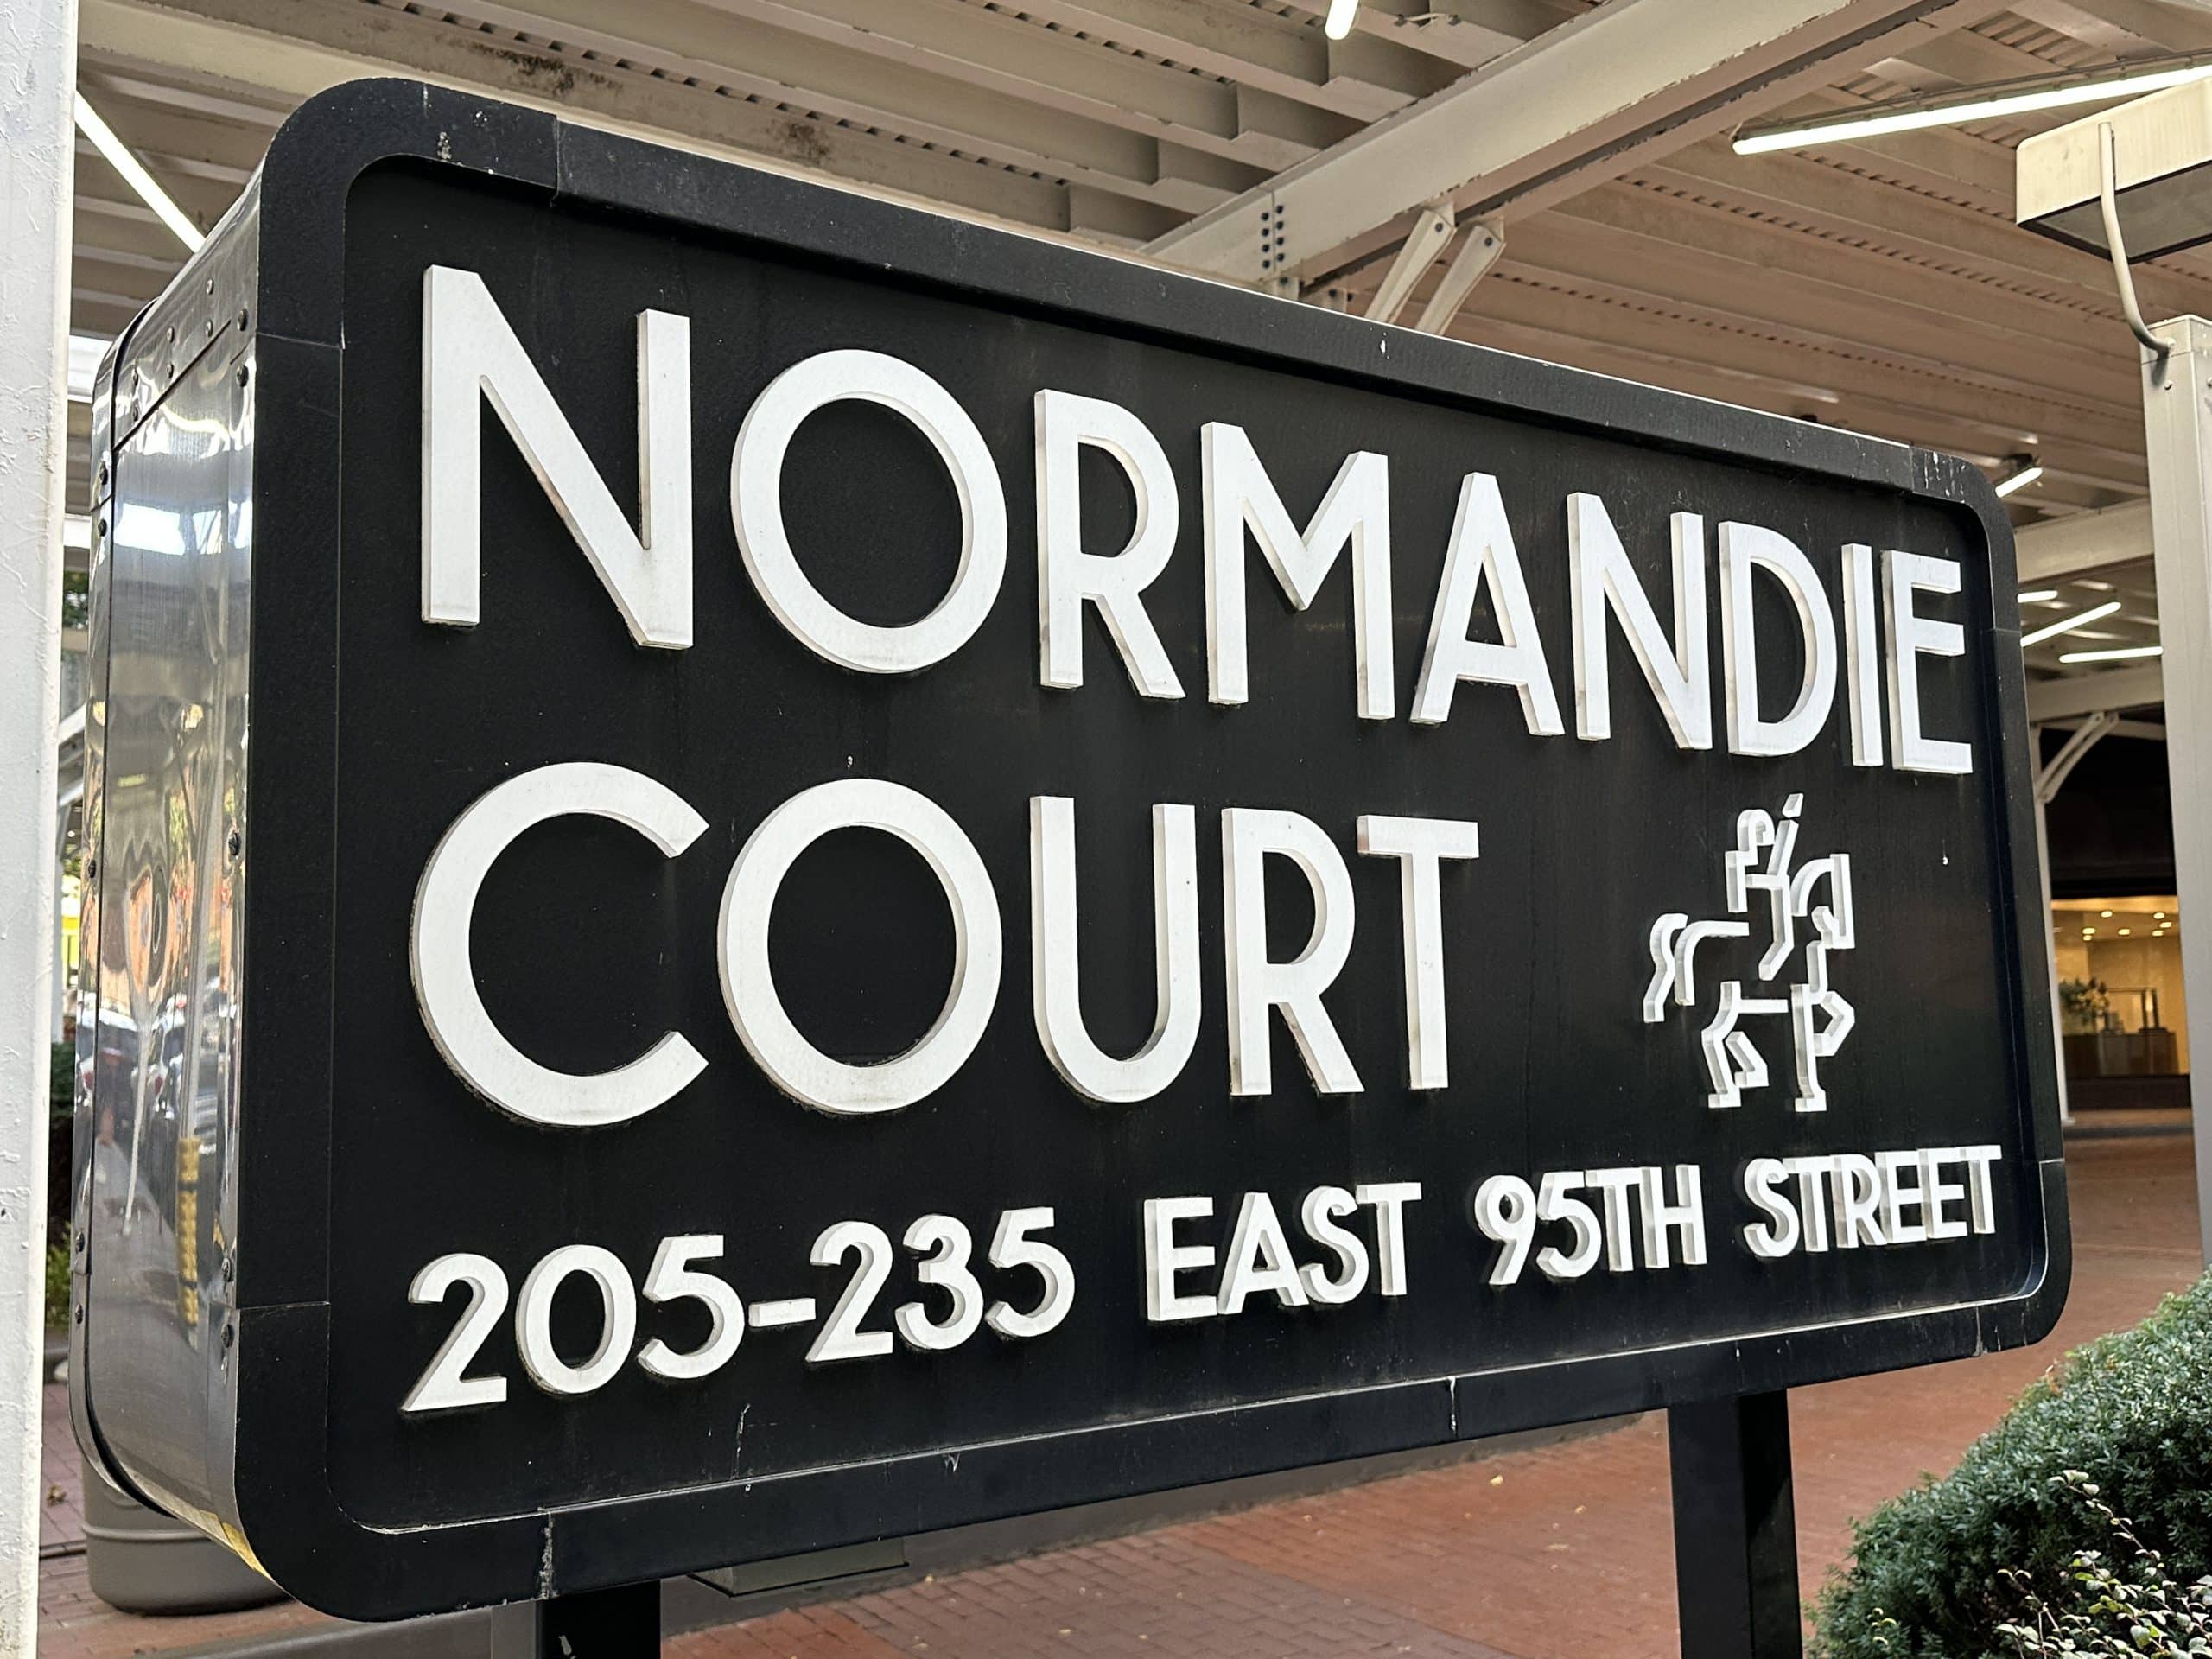 Police were called to Normandie Court for an assault when they found the unresponsive man | Upper East Site